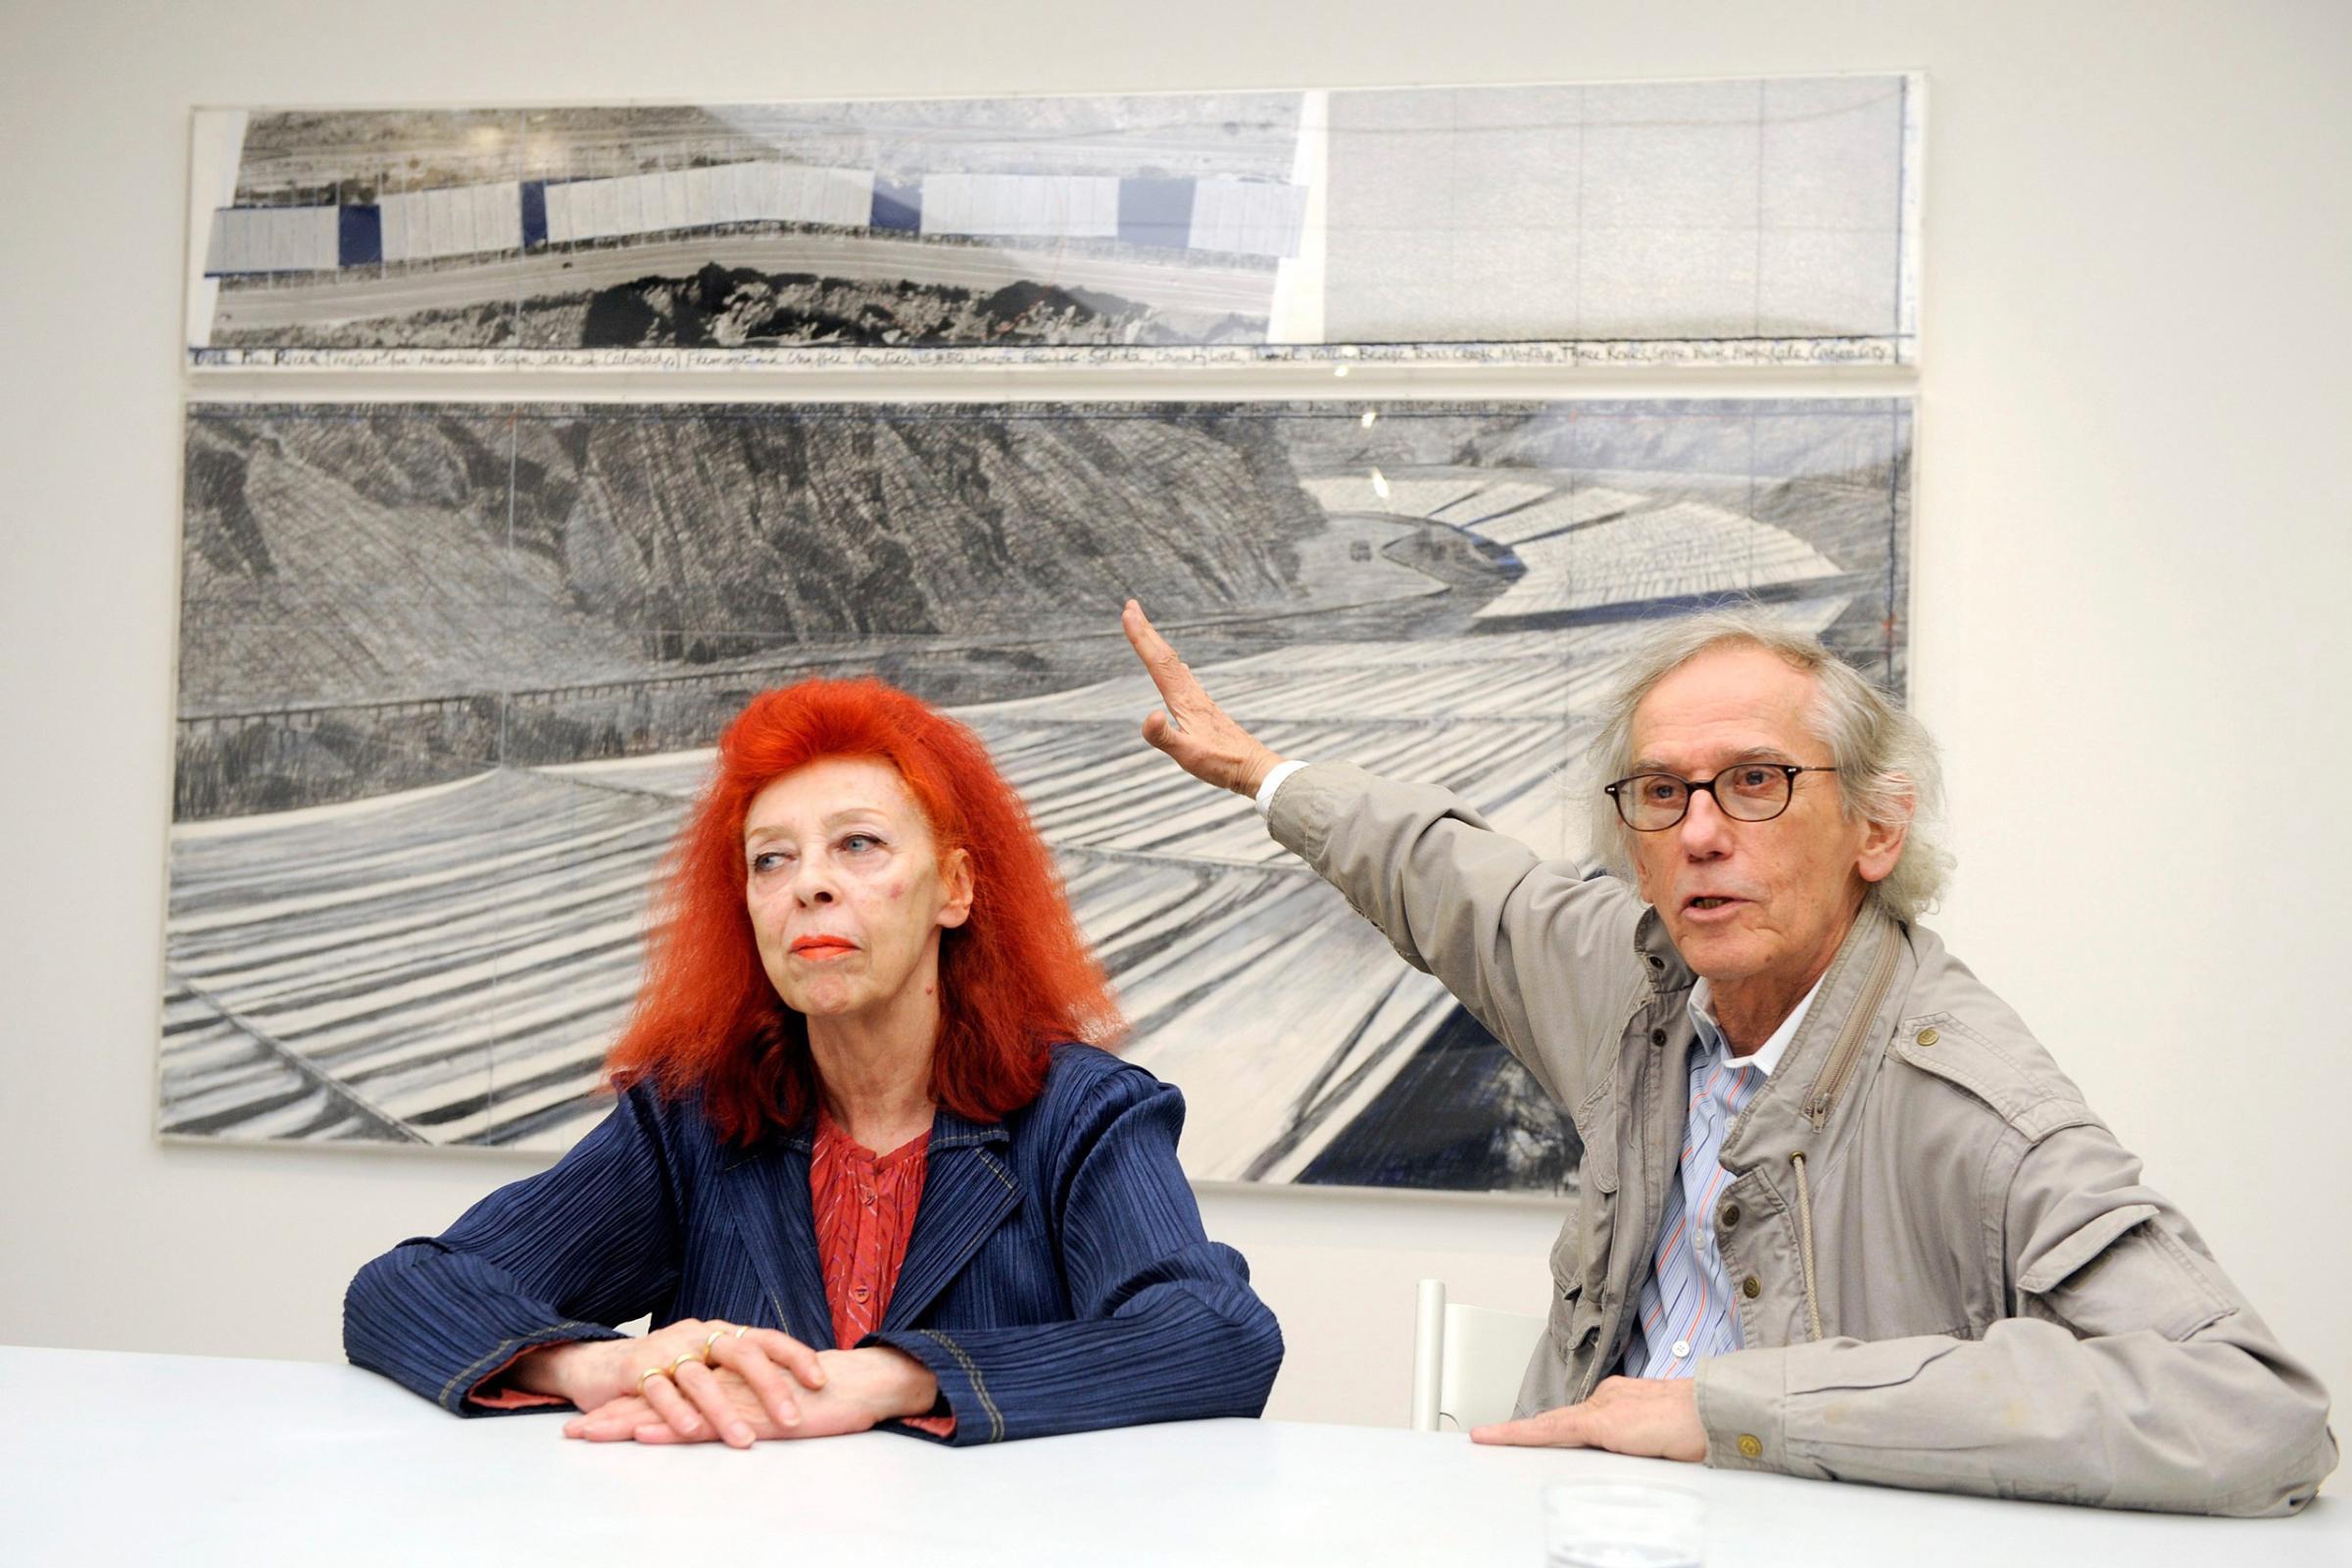 FILE--In this Feb. 11, 2009, file photograph, artist Christo, right, and his partner, Jeanne-Claude, are shown during a press conference for their exhibition "Over the River, A Work in Progress" at the Fondation de lHermitage in Lausanne, Switzerland. The artists' then-current artwork in progress was called, "Over The River," which proposed the horizontal suspension of fabric panels in separate segments along a stretch above the Arkansas River in southern Colorado. On Wednesday, Jan. 25, 2017, Christo announced that he has abandoned his plans for the display over the Arkansas River. (Keystone/Dominic Favre via AP, file)